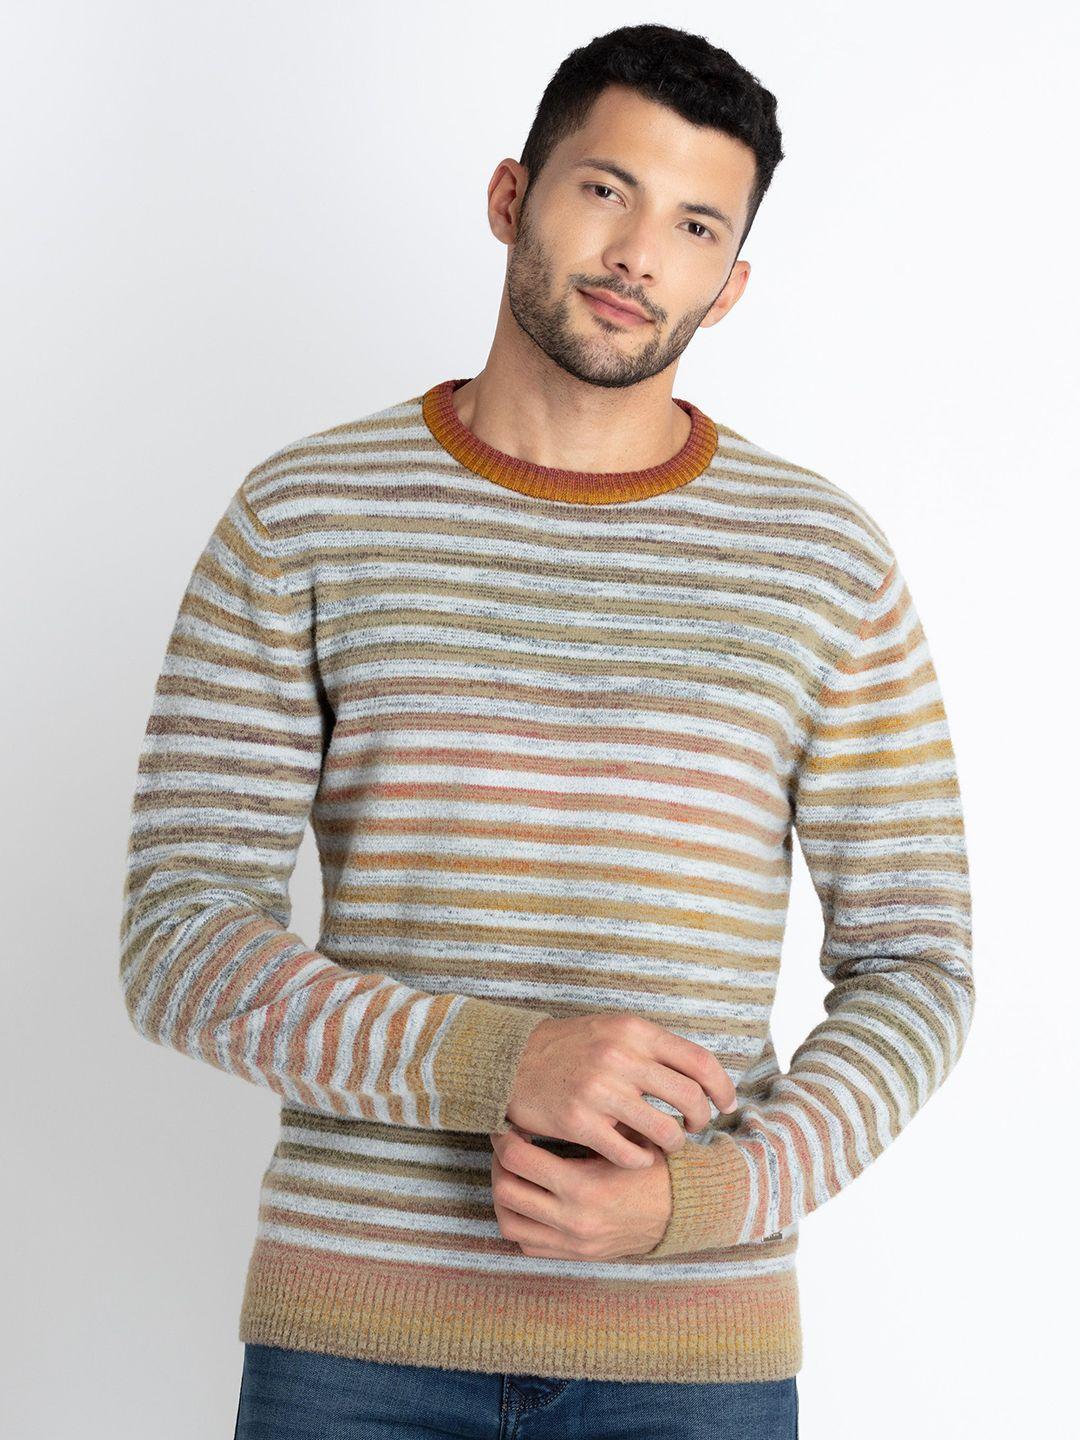 status quo striped round neck long sleeves acrylic pullover sweater